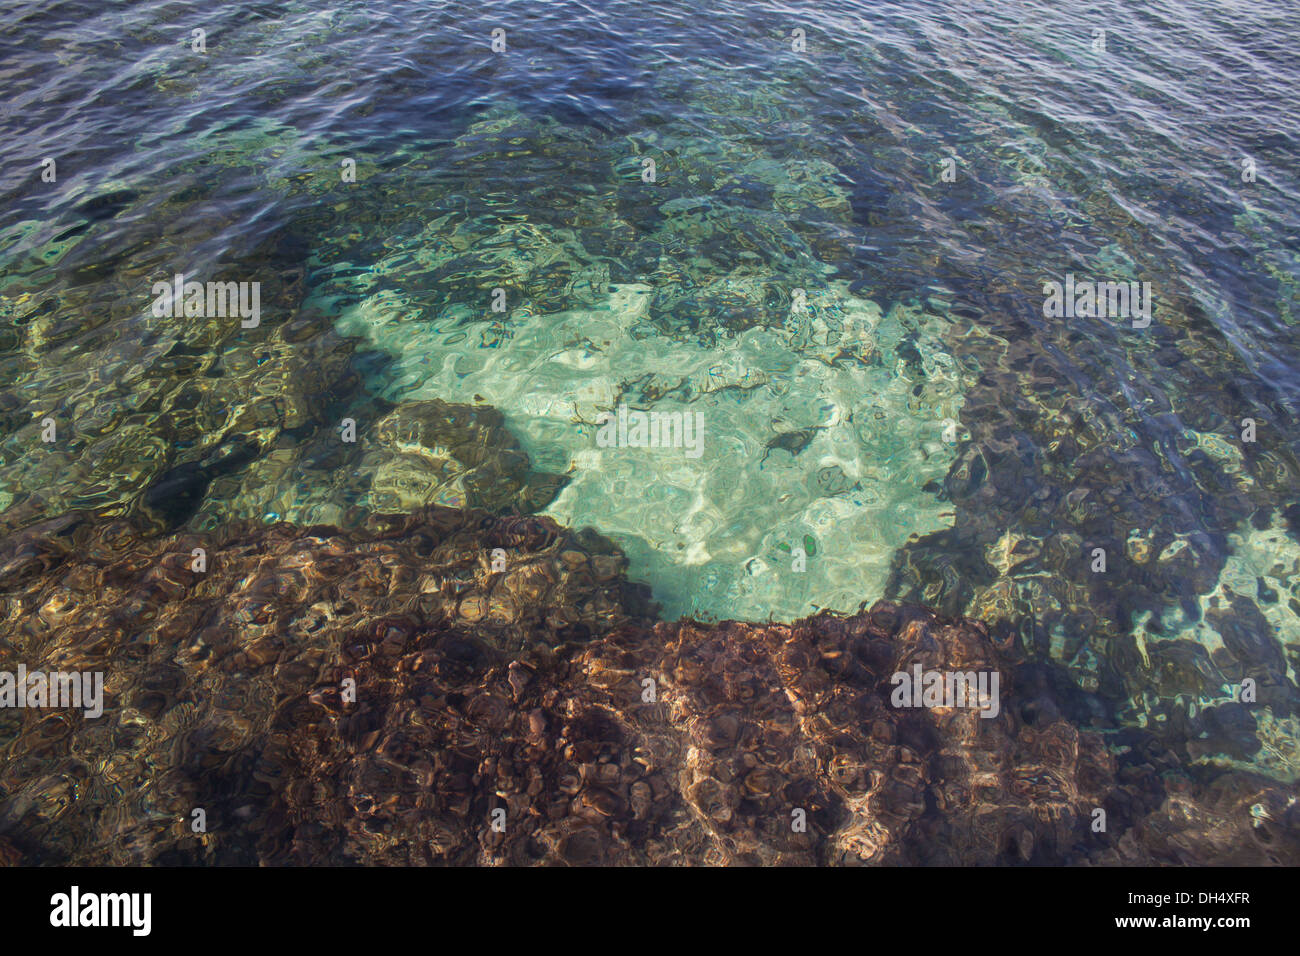 transparent, sea, water, green, brown, close-up, background Stock Photo